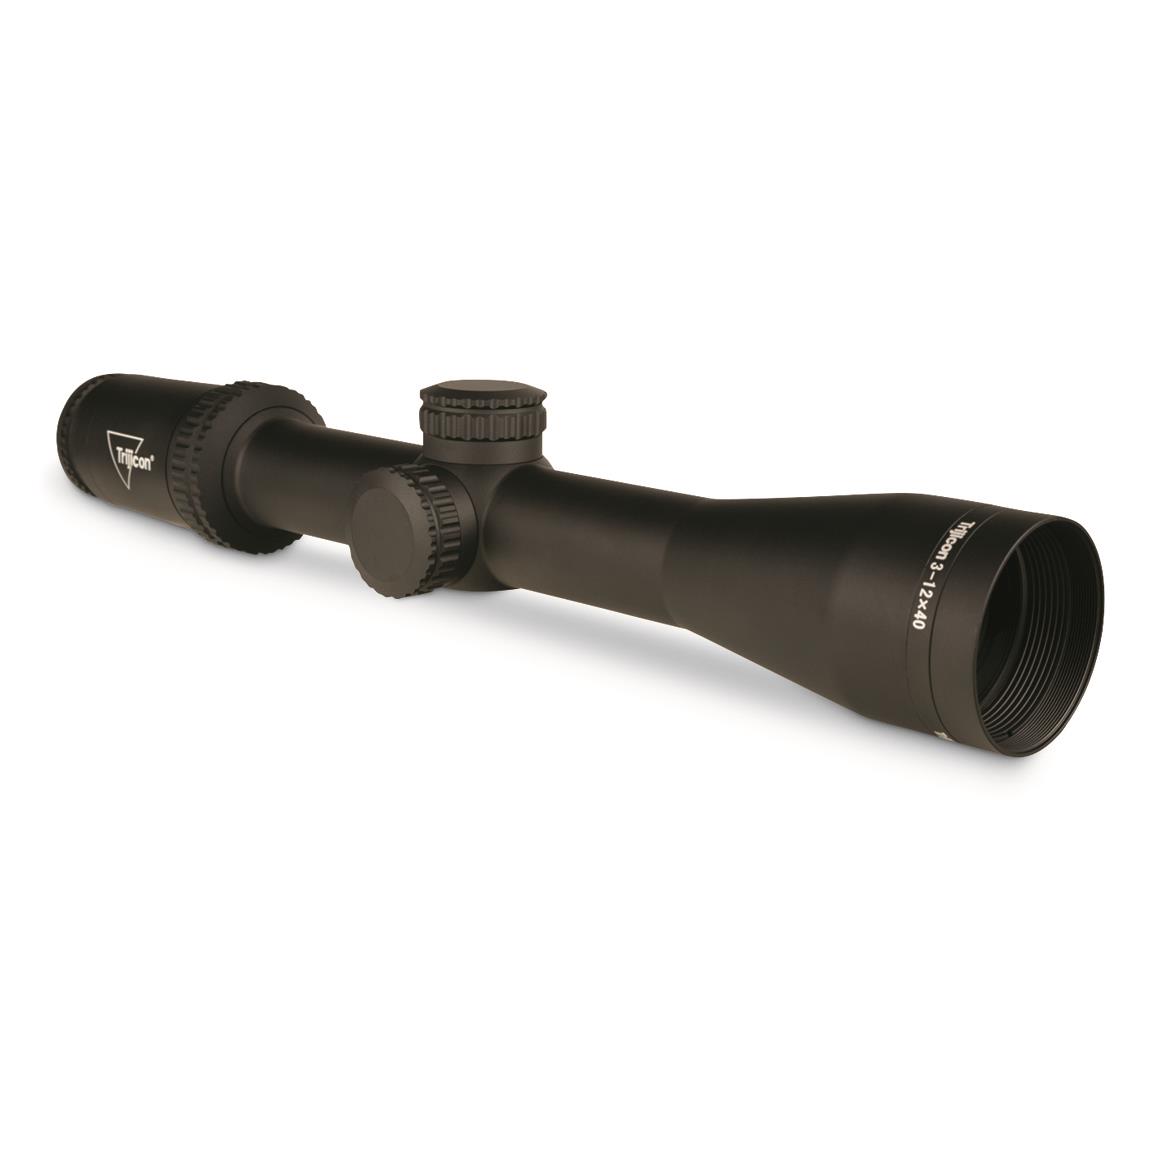 Trijicon Ascent 3-12x40mm Rifle Scope, BDC Target Hold Reticle